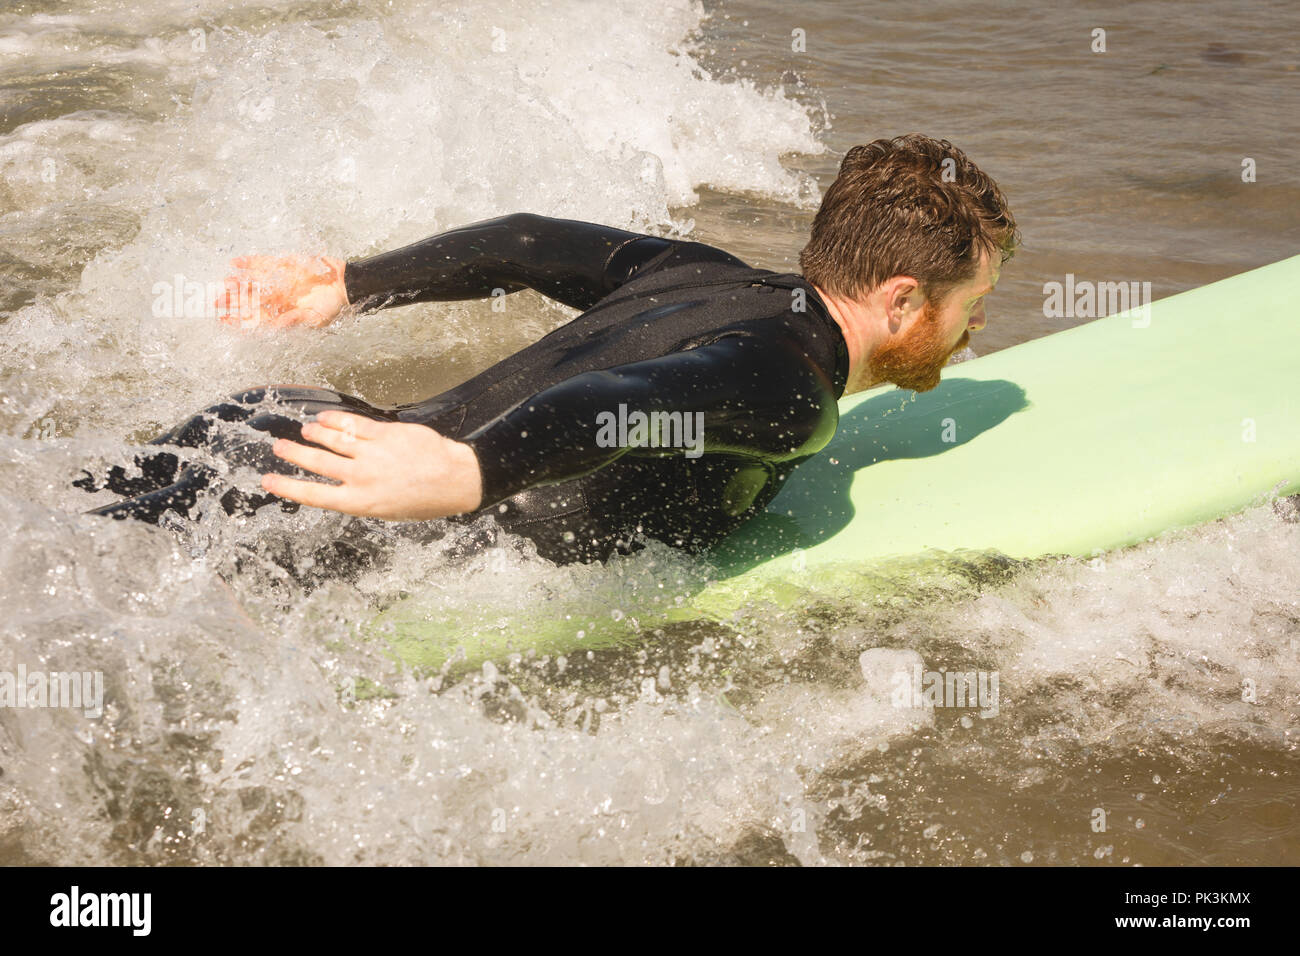 Surfer surfing on seawater Stock Photo